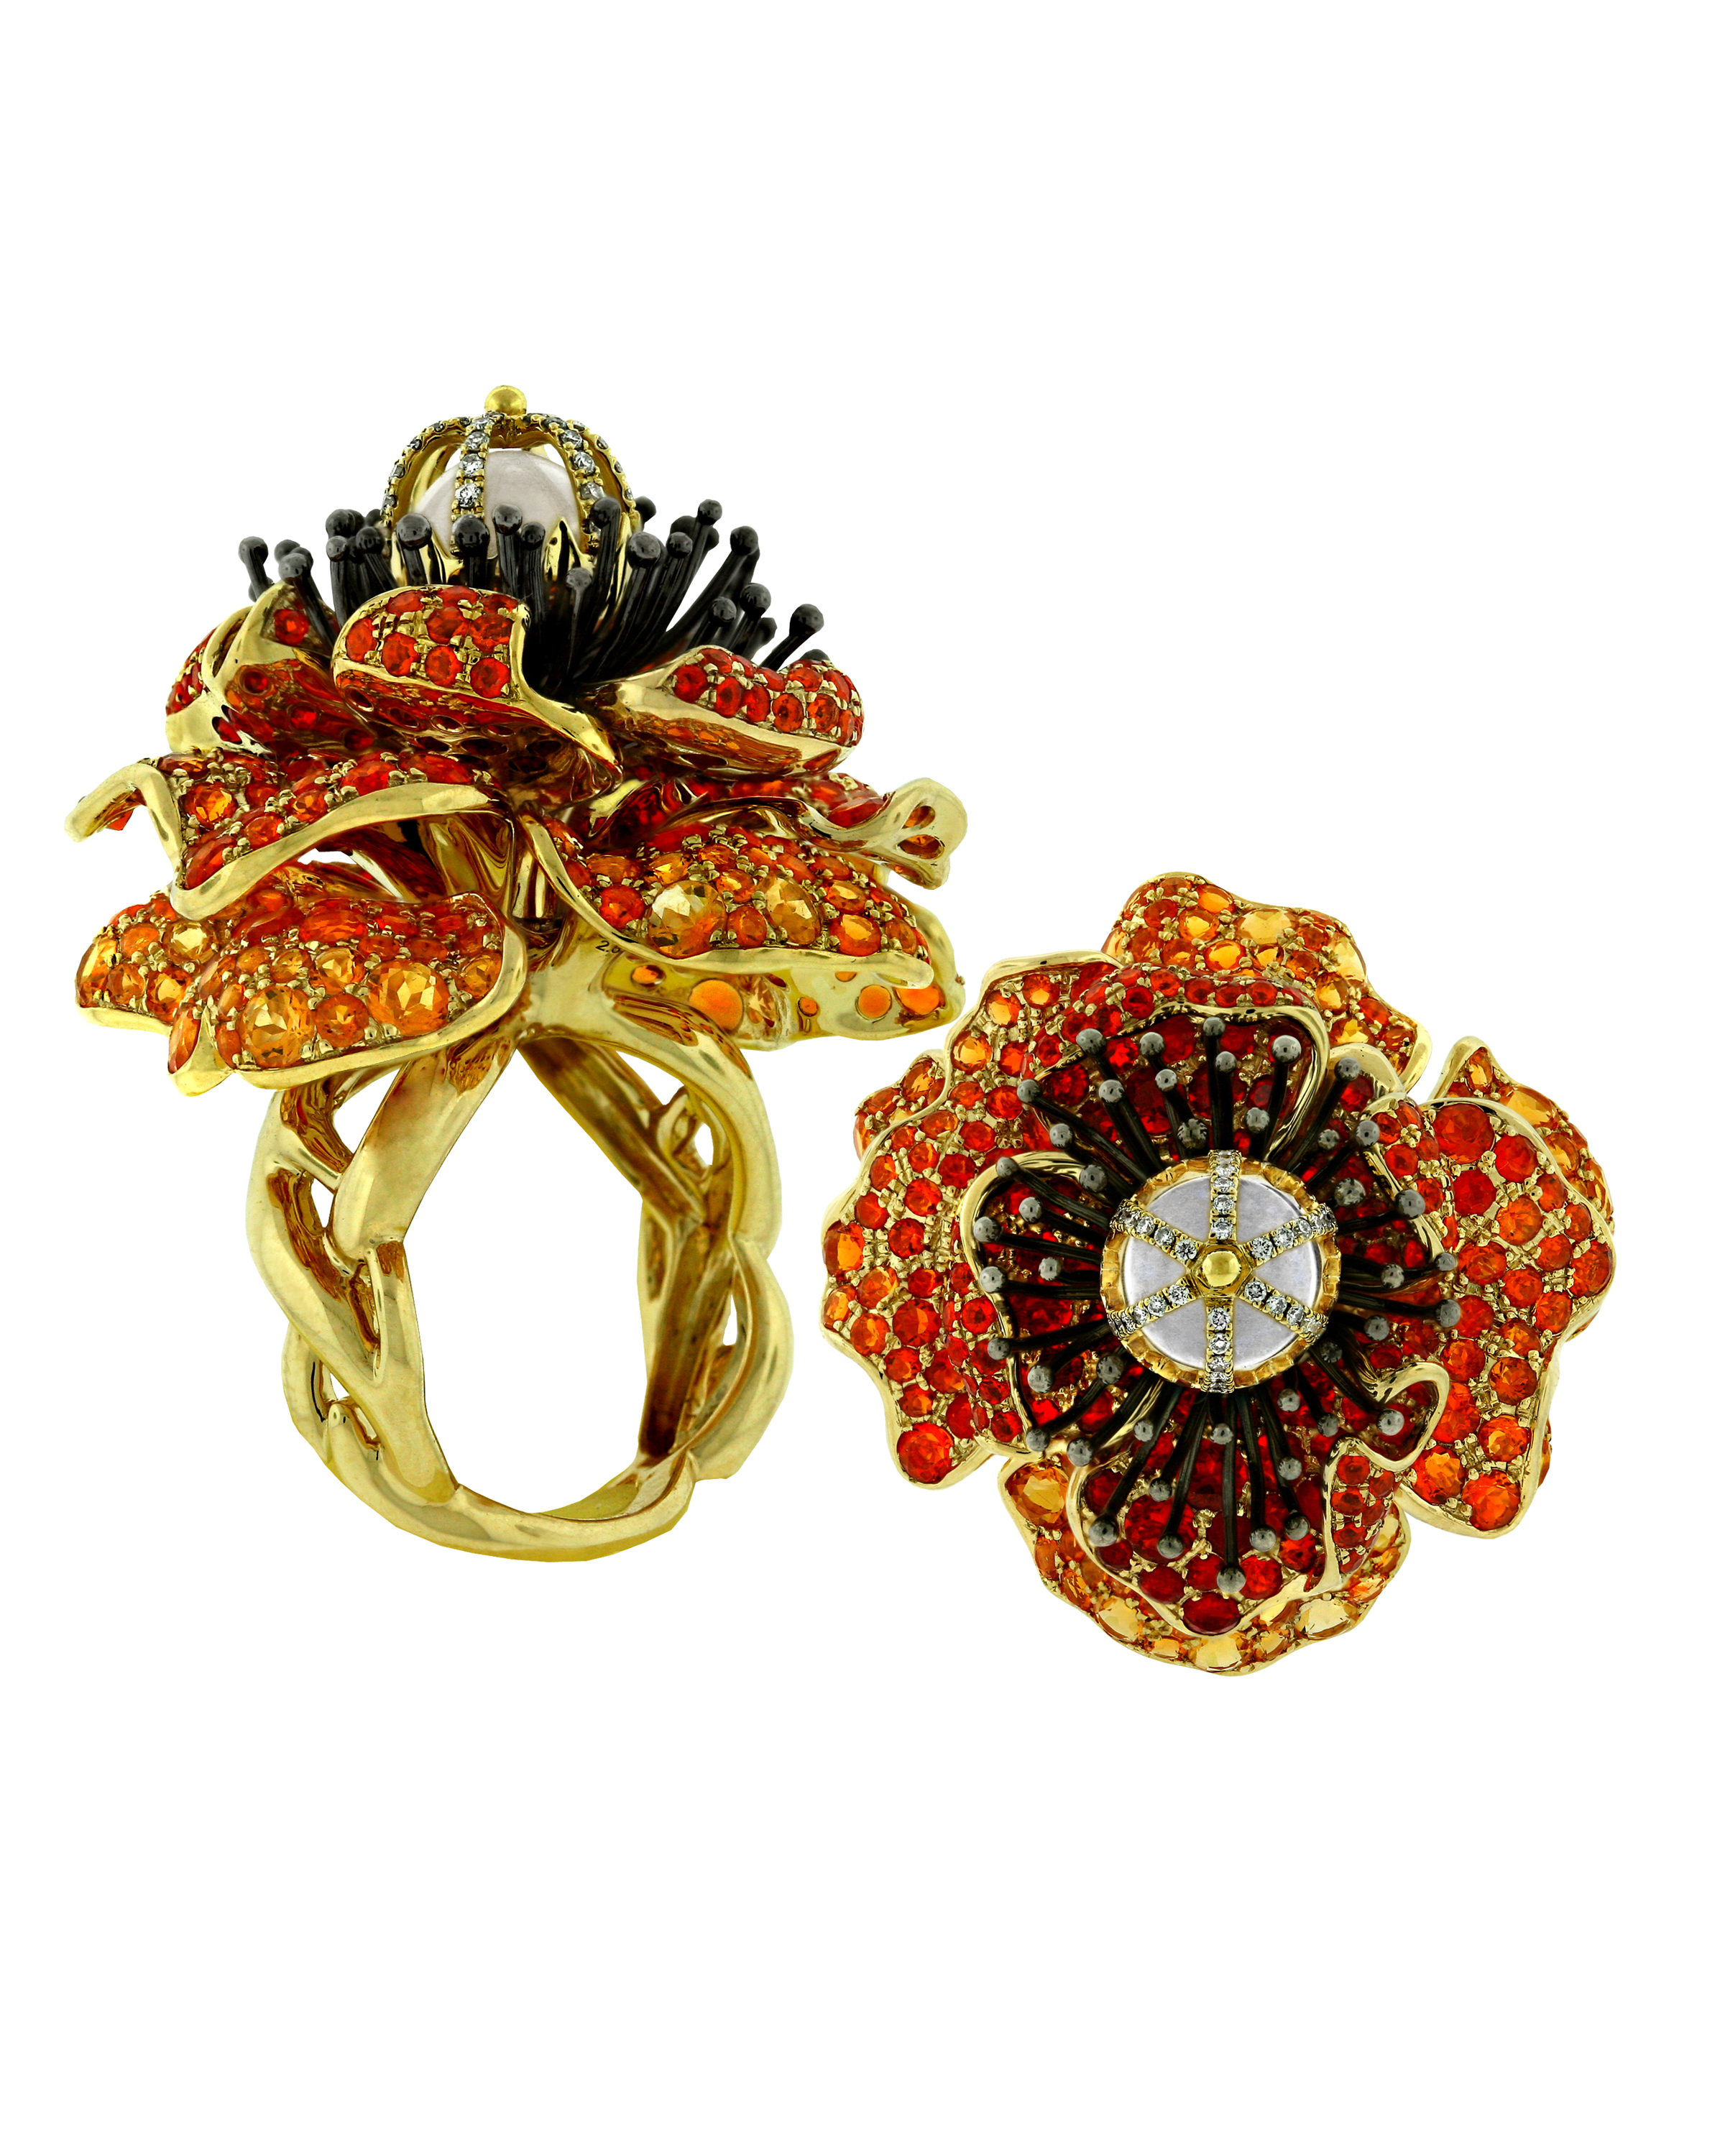 Paula Crevoshay "Poppy Ring" featuring Moonstone, Diamonds and  Fire Opals. This poppy ring is a symbol of sleep, dreams and peace. Crevoshay's anatomically correct expression mirrors the opulence found in nature.